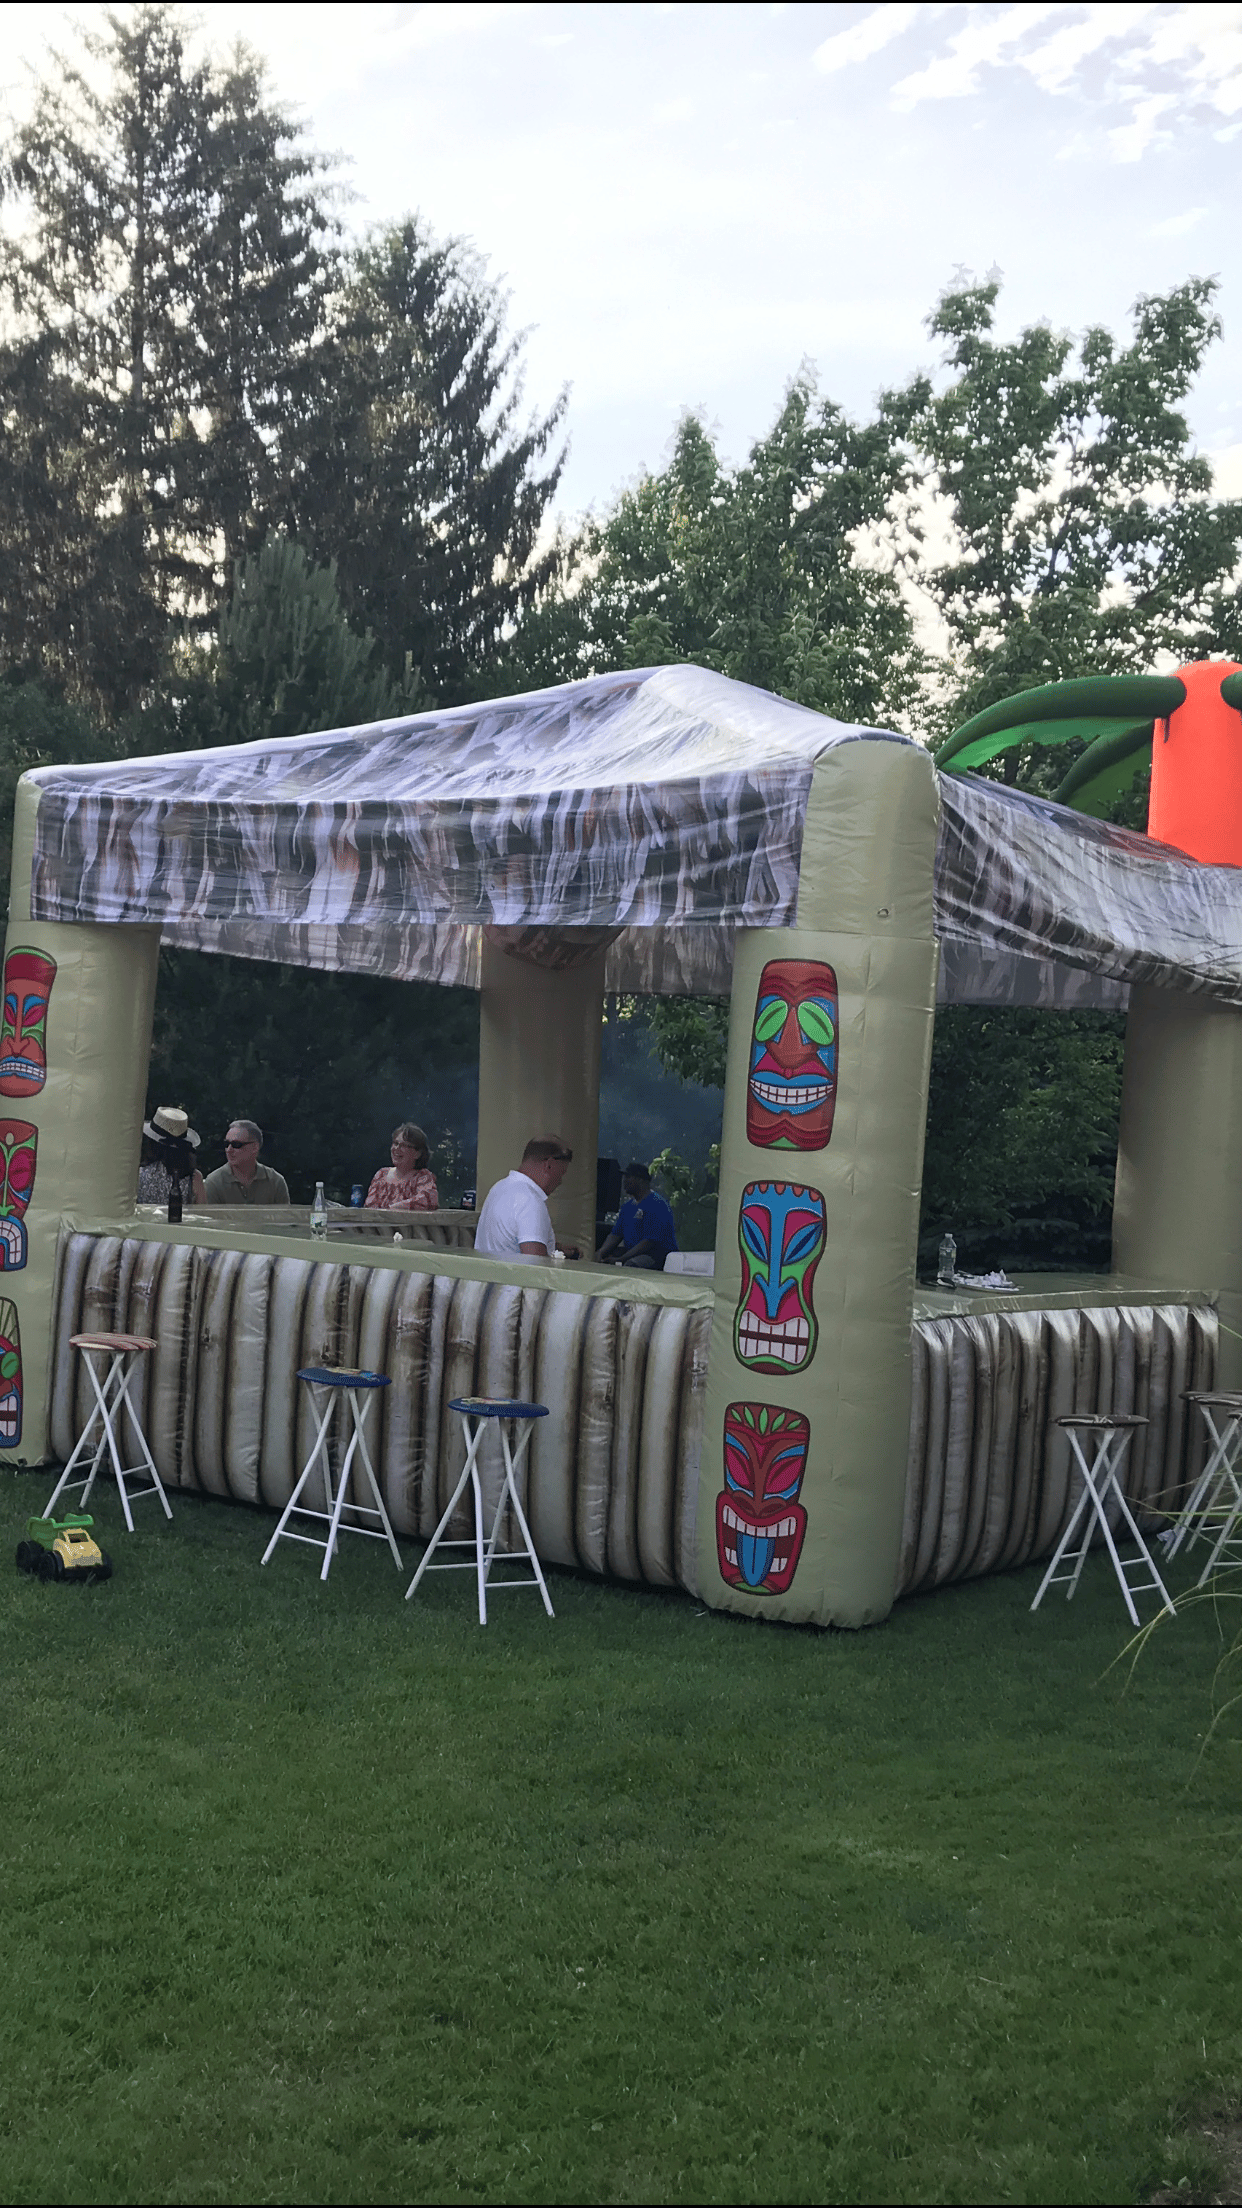 Yes, you can rent an inflatable Tiki Bar! Who knew…